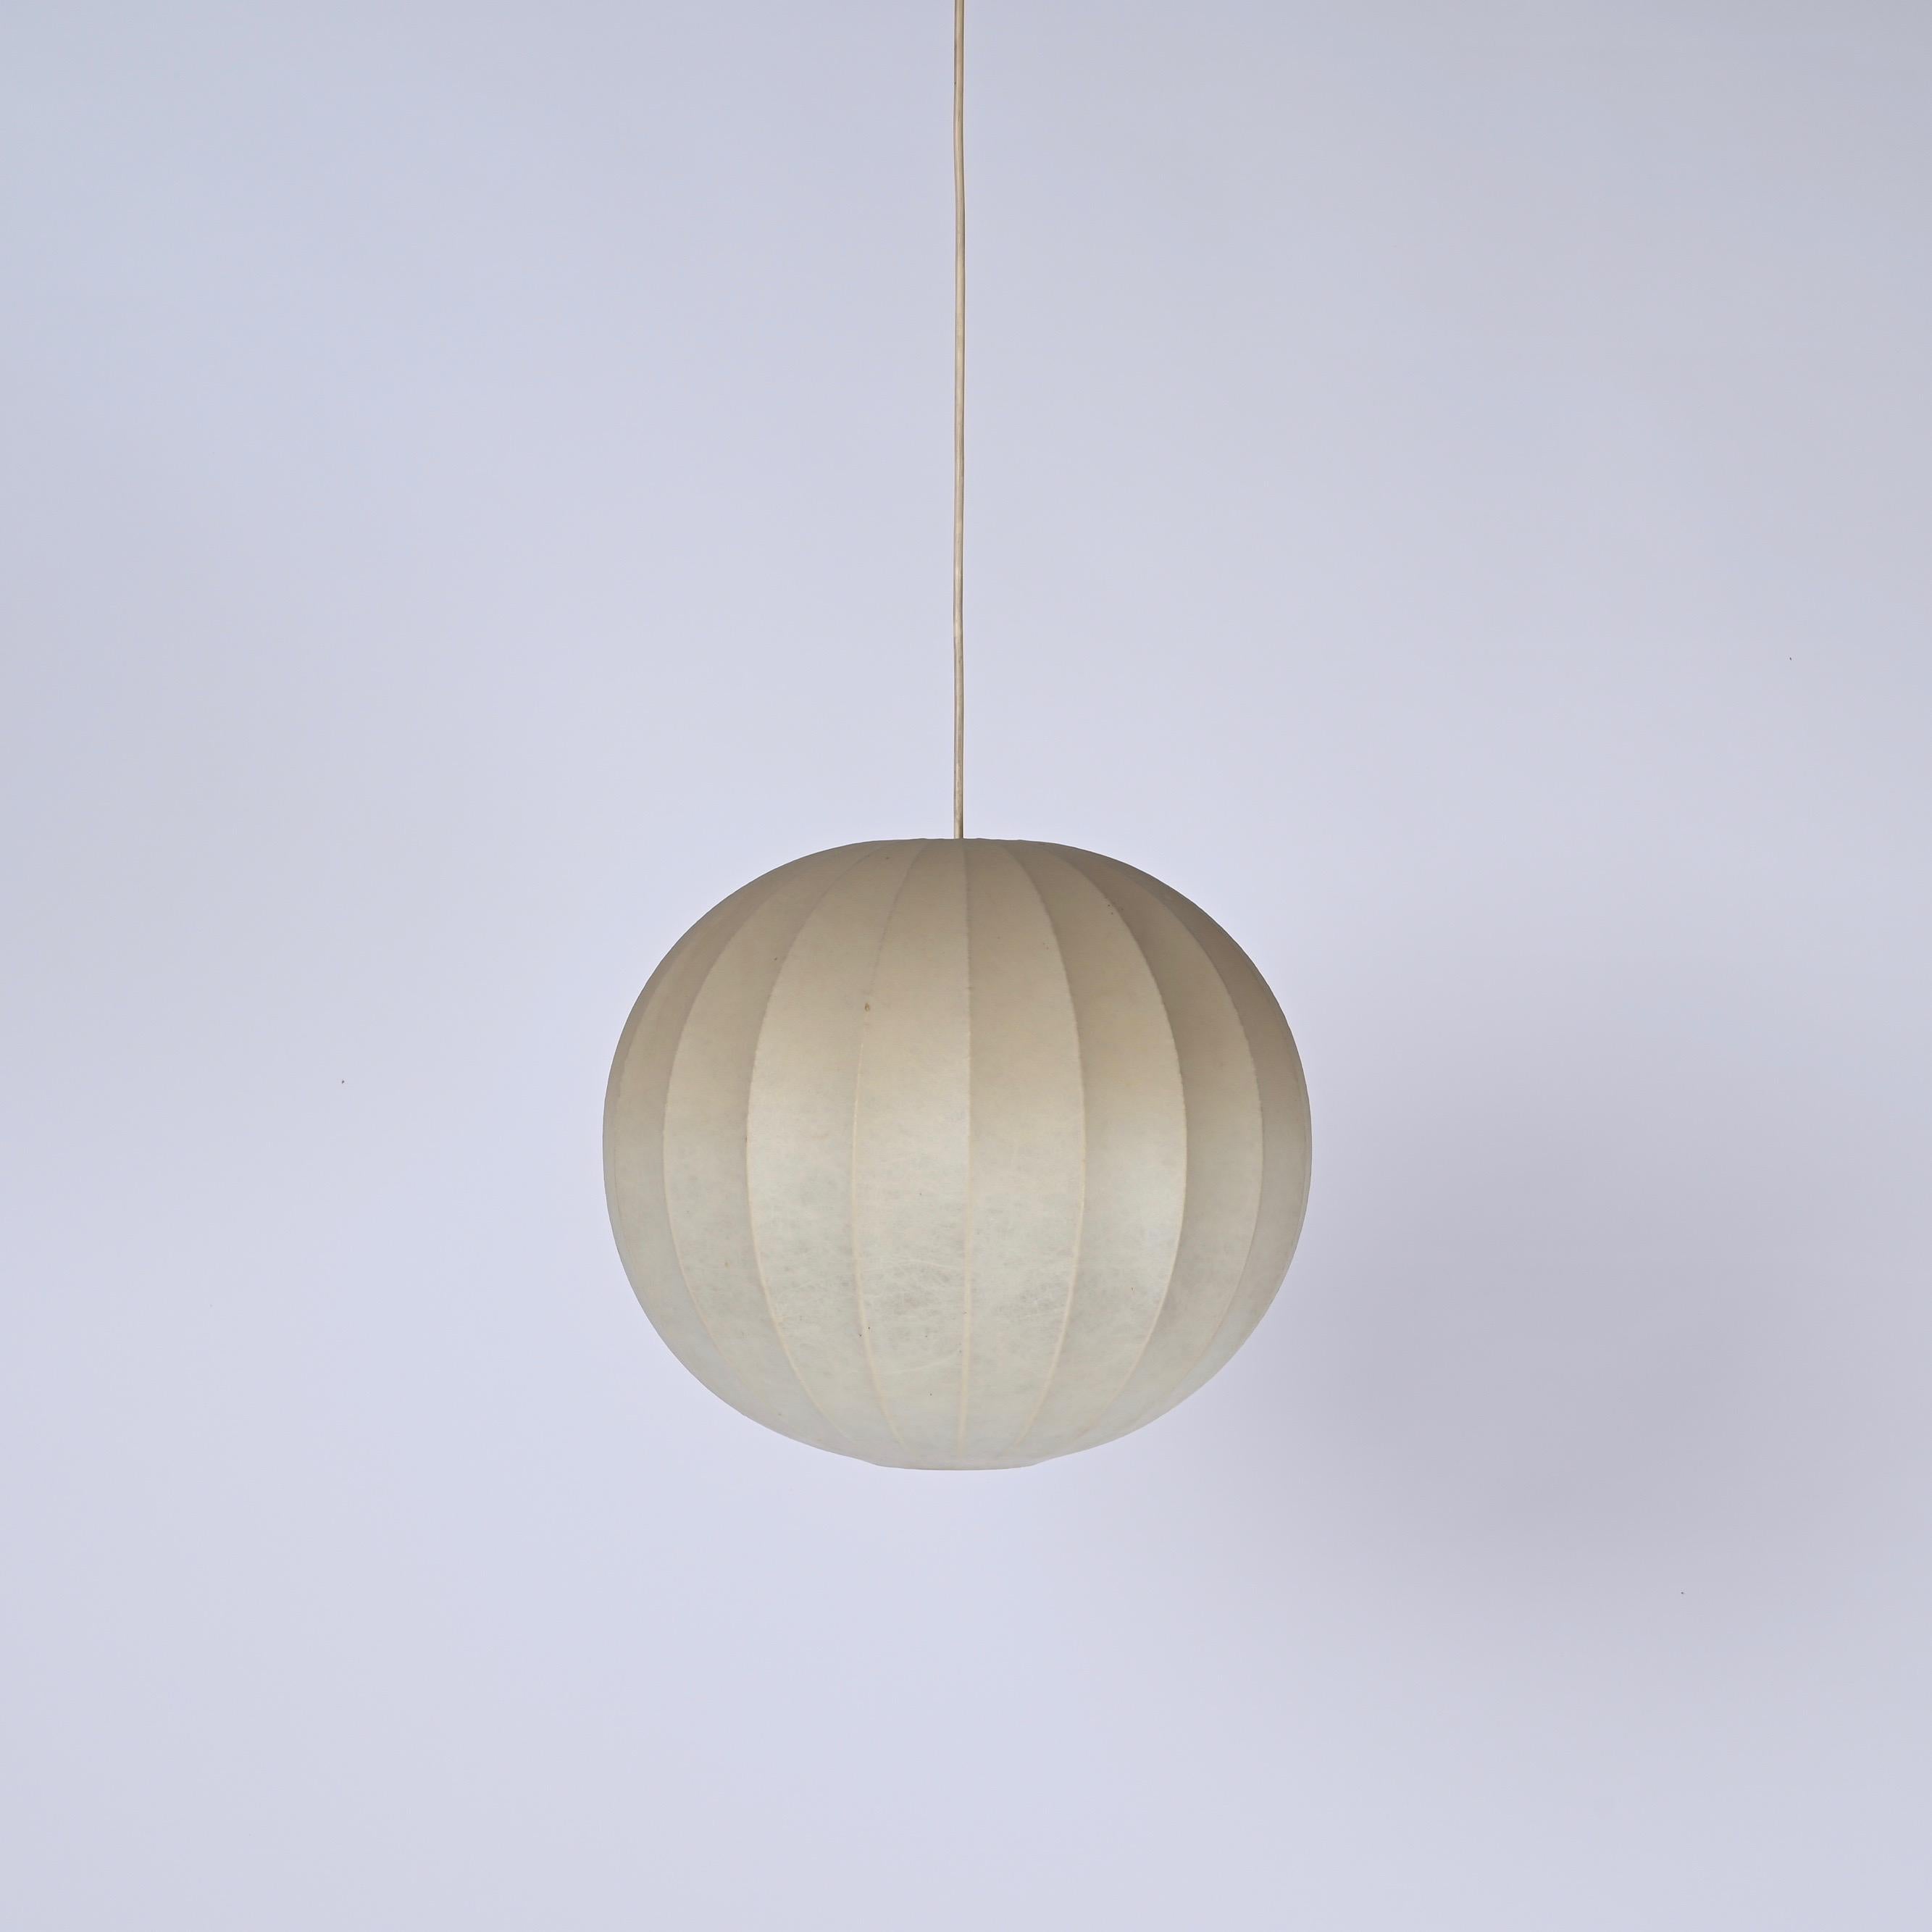 Lovely 'Cocoon' chandelier in resin and steel. This gorgeous pendant lamp was designed by Achille Castiglioni in Italy in the 1960s.

This iconic piece features a round lampshade in a natural soft resin in a stunning vintage beige color, the metal